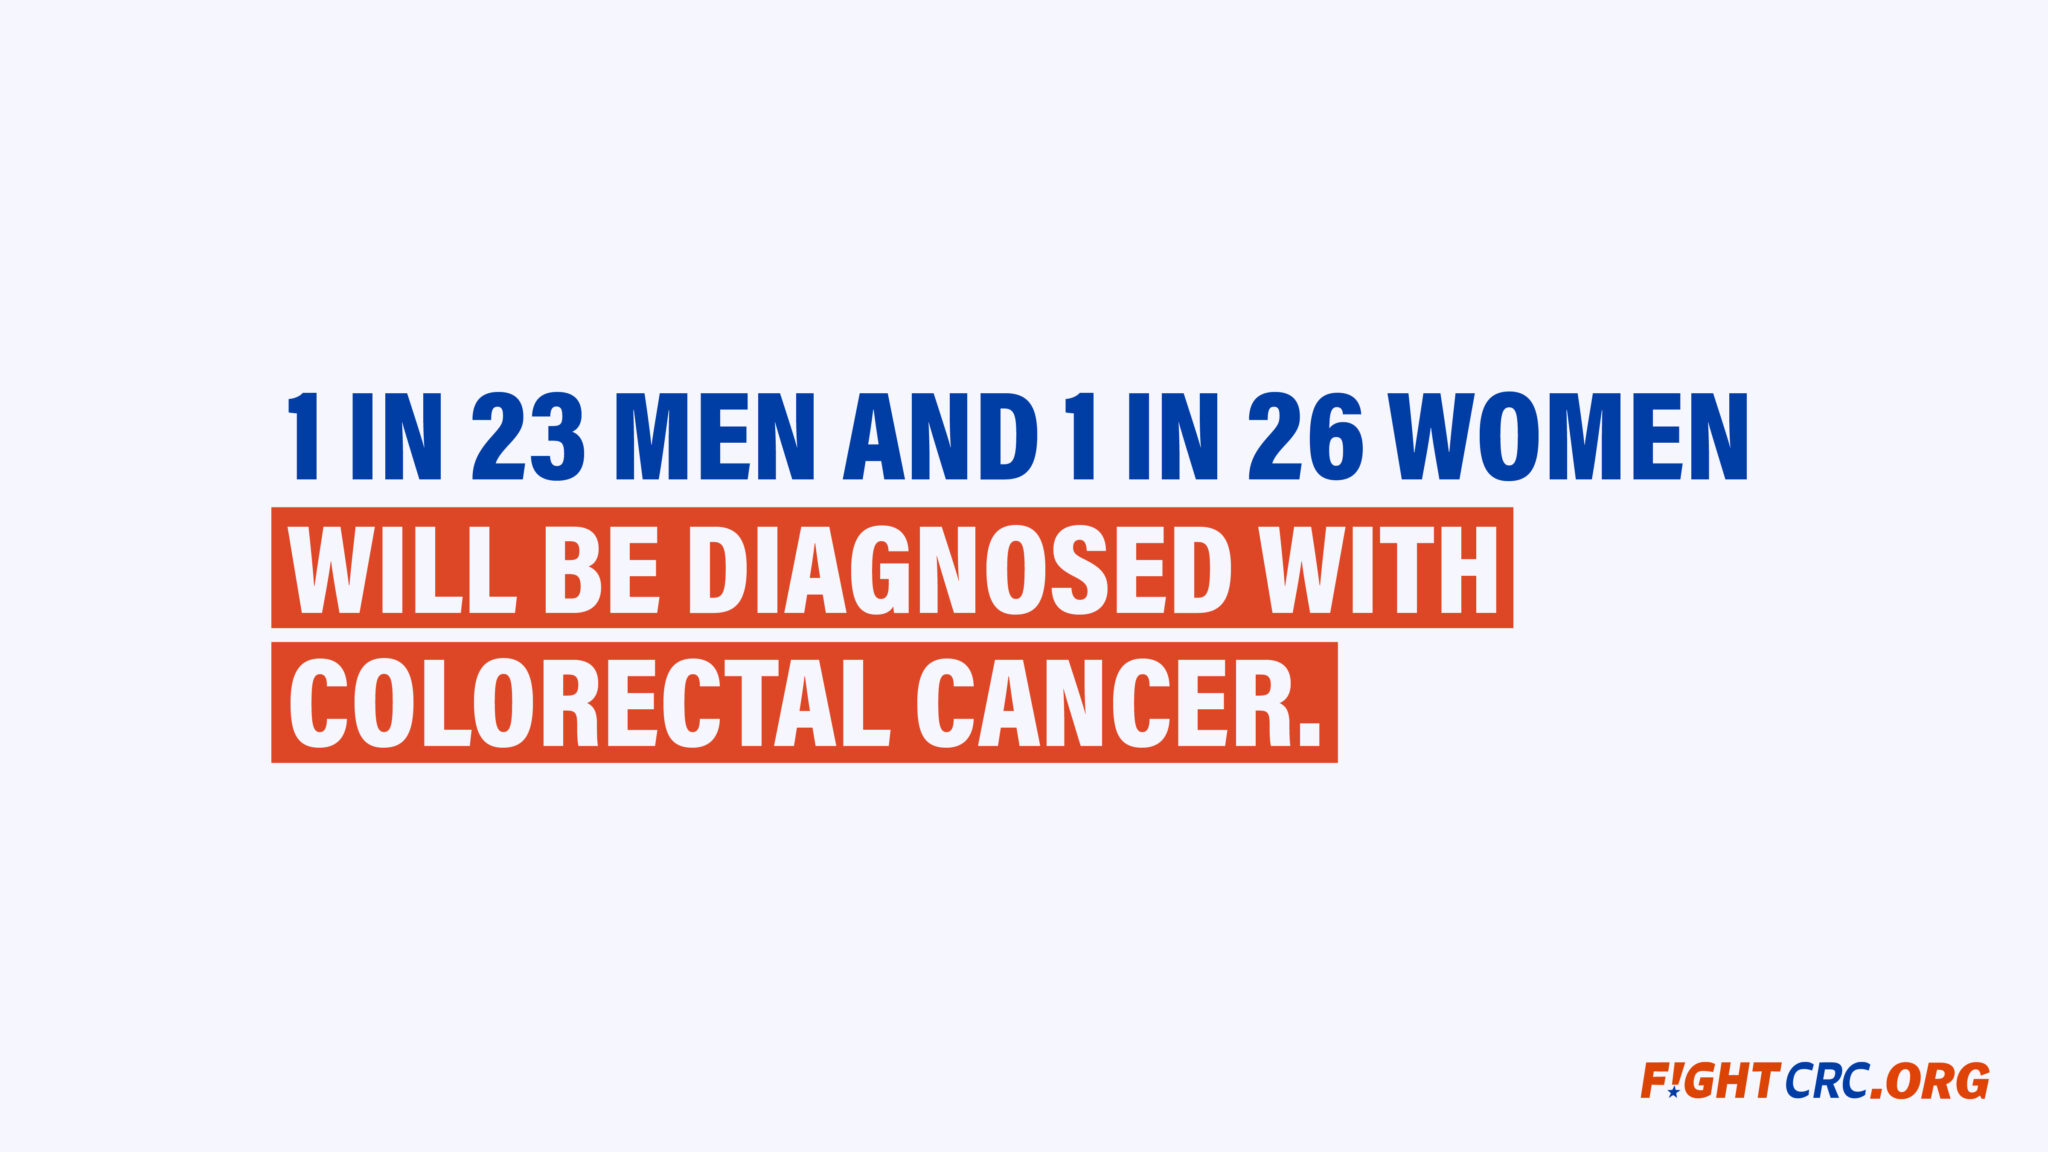 colon cancer rates 1 in 23 men and 1 in 26 women will be diagnosed